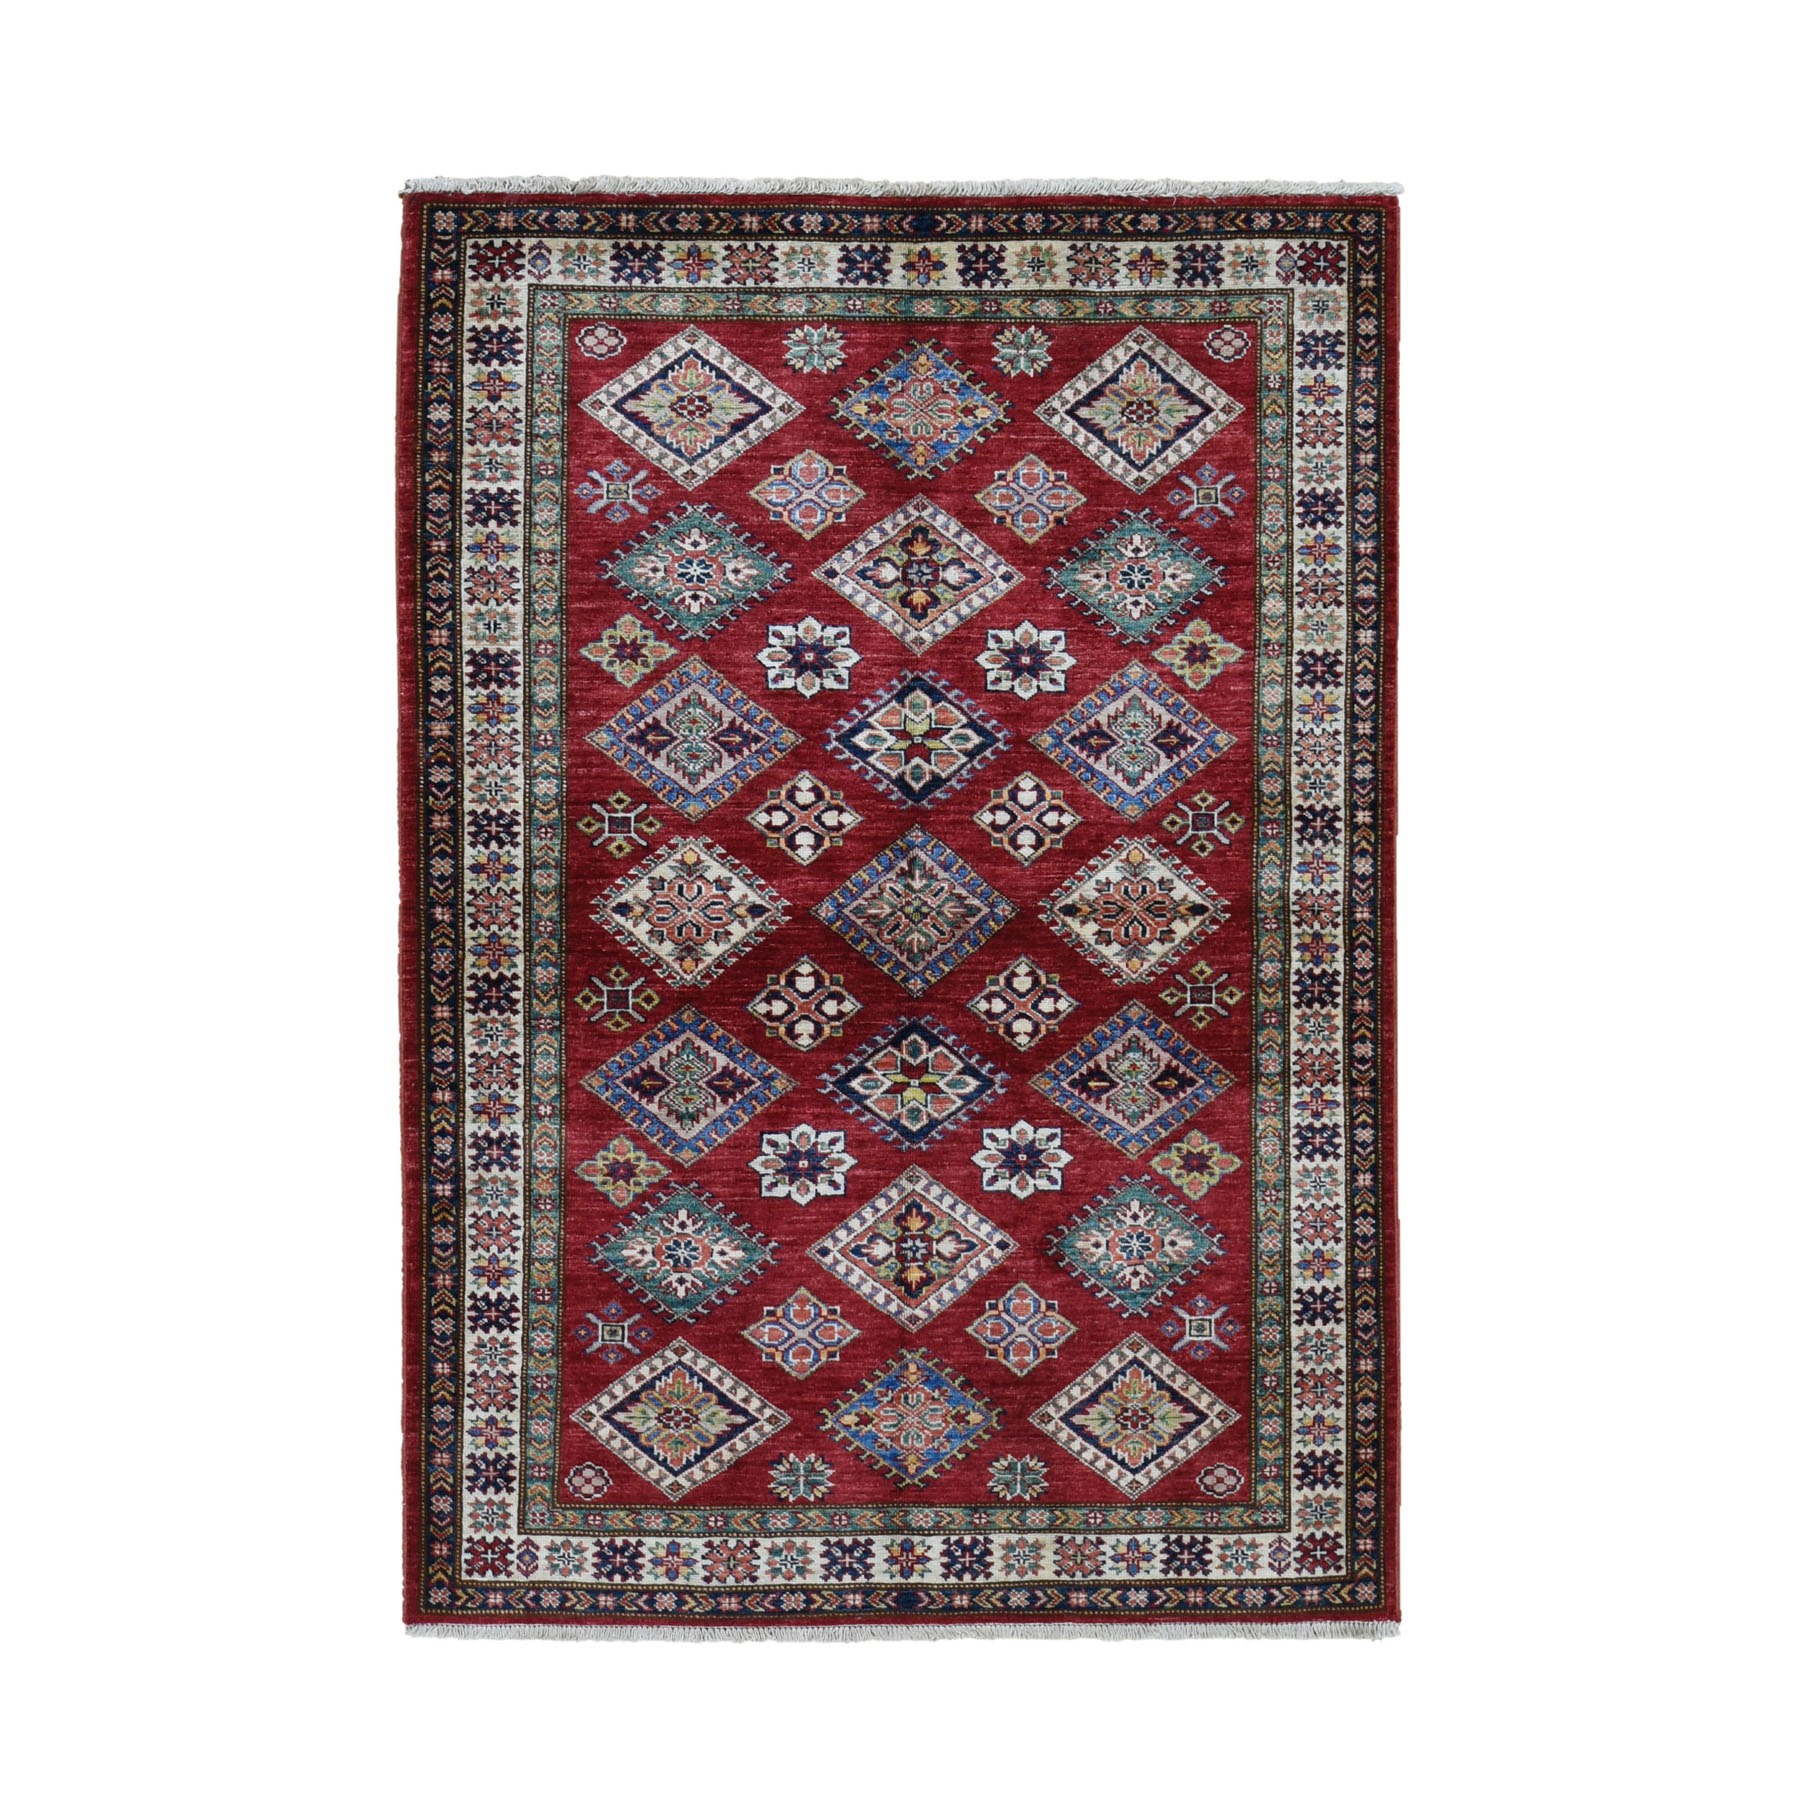 4'X5'7" Red Super Kazak Pure Wool Geometric Design Hand Knotted Oriental Rug moad7ad8